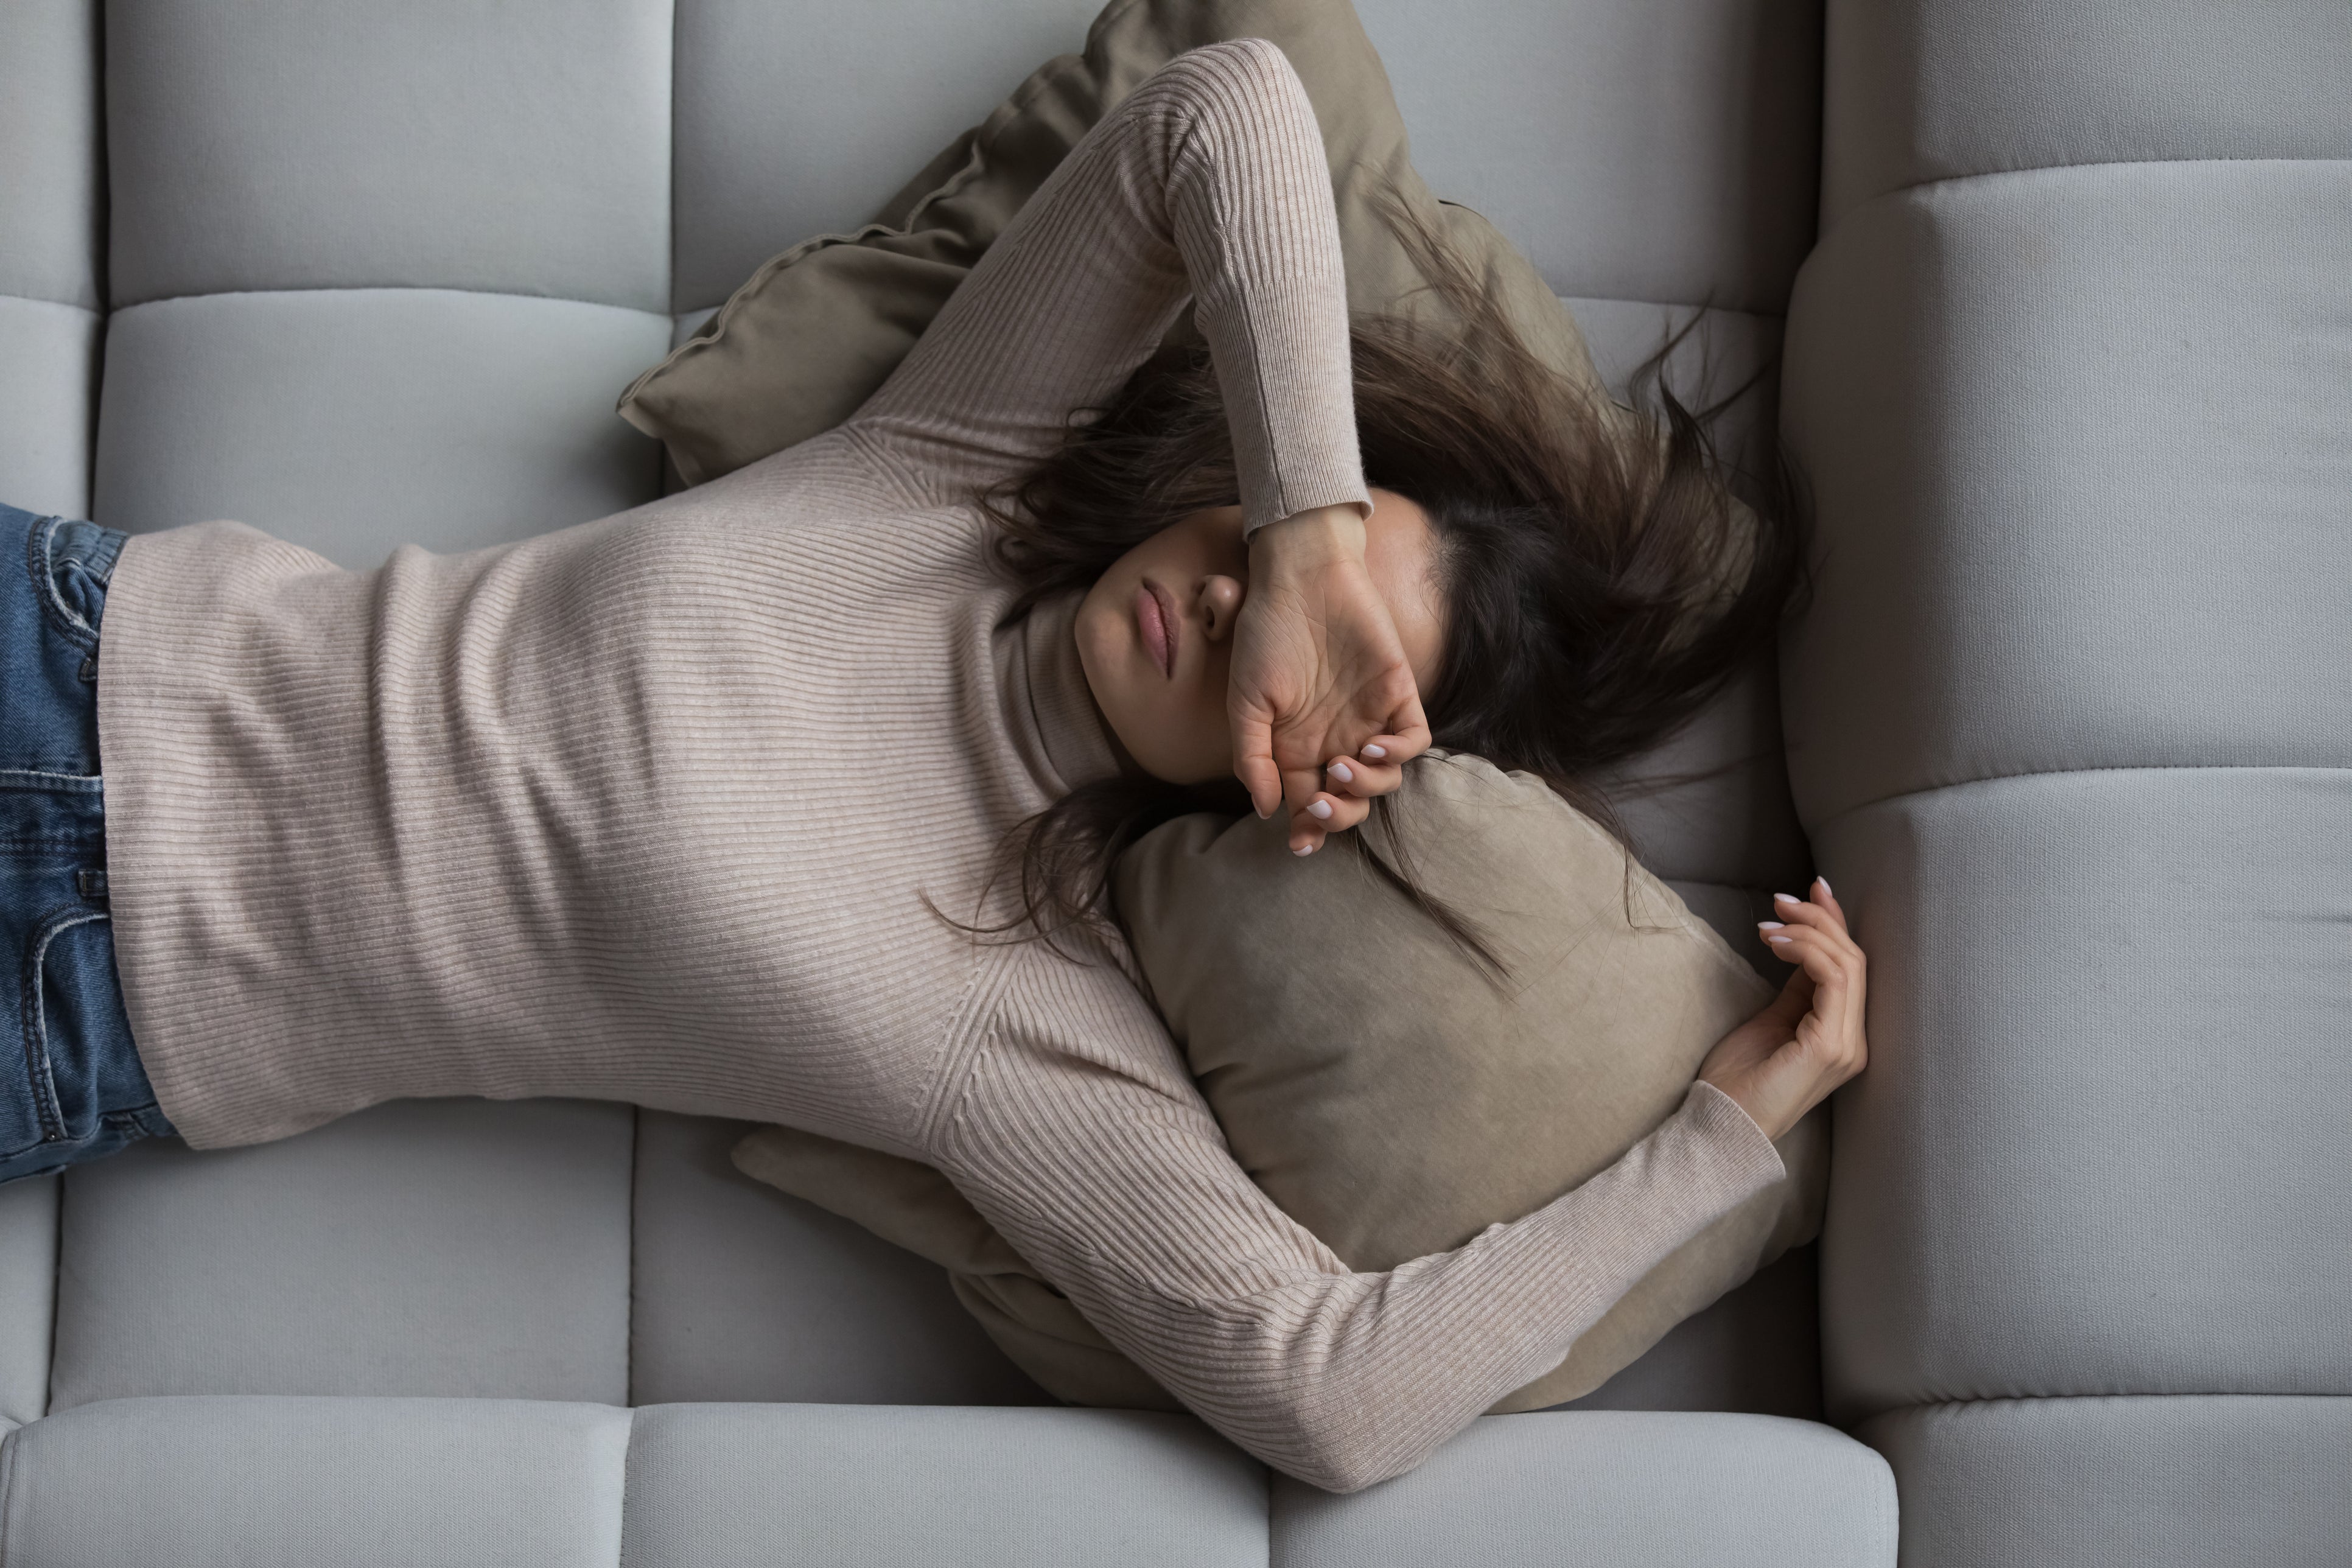 Apparently not having enough sleep is more risky for women